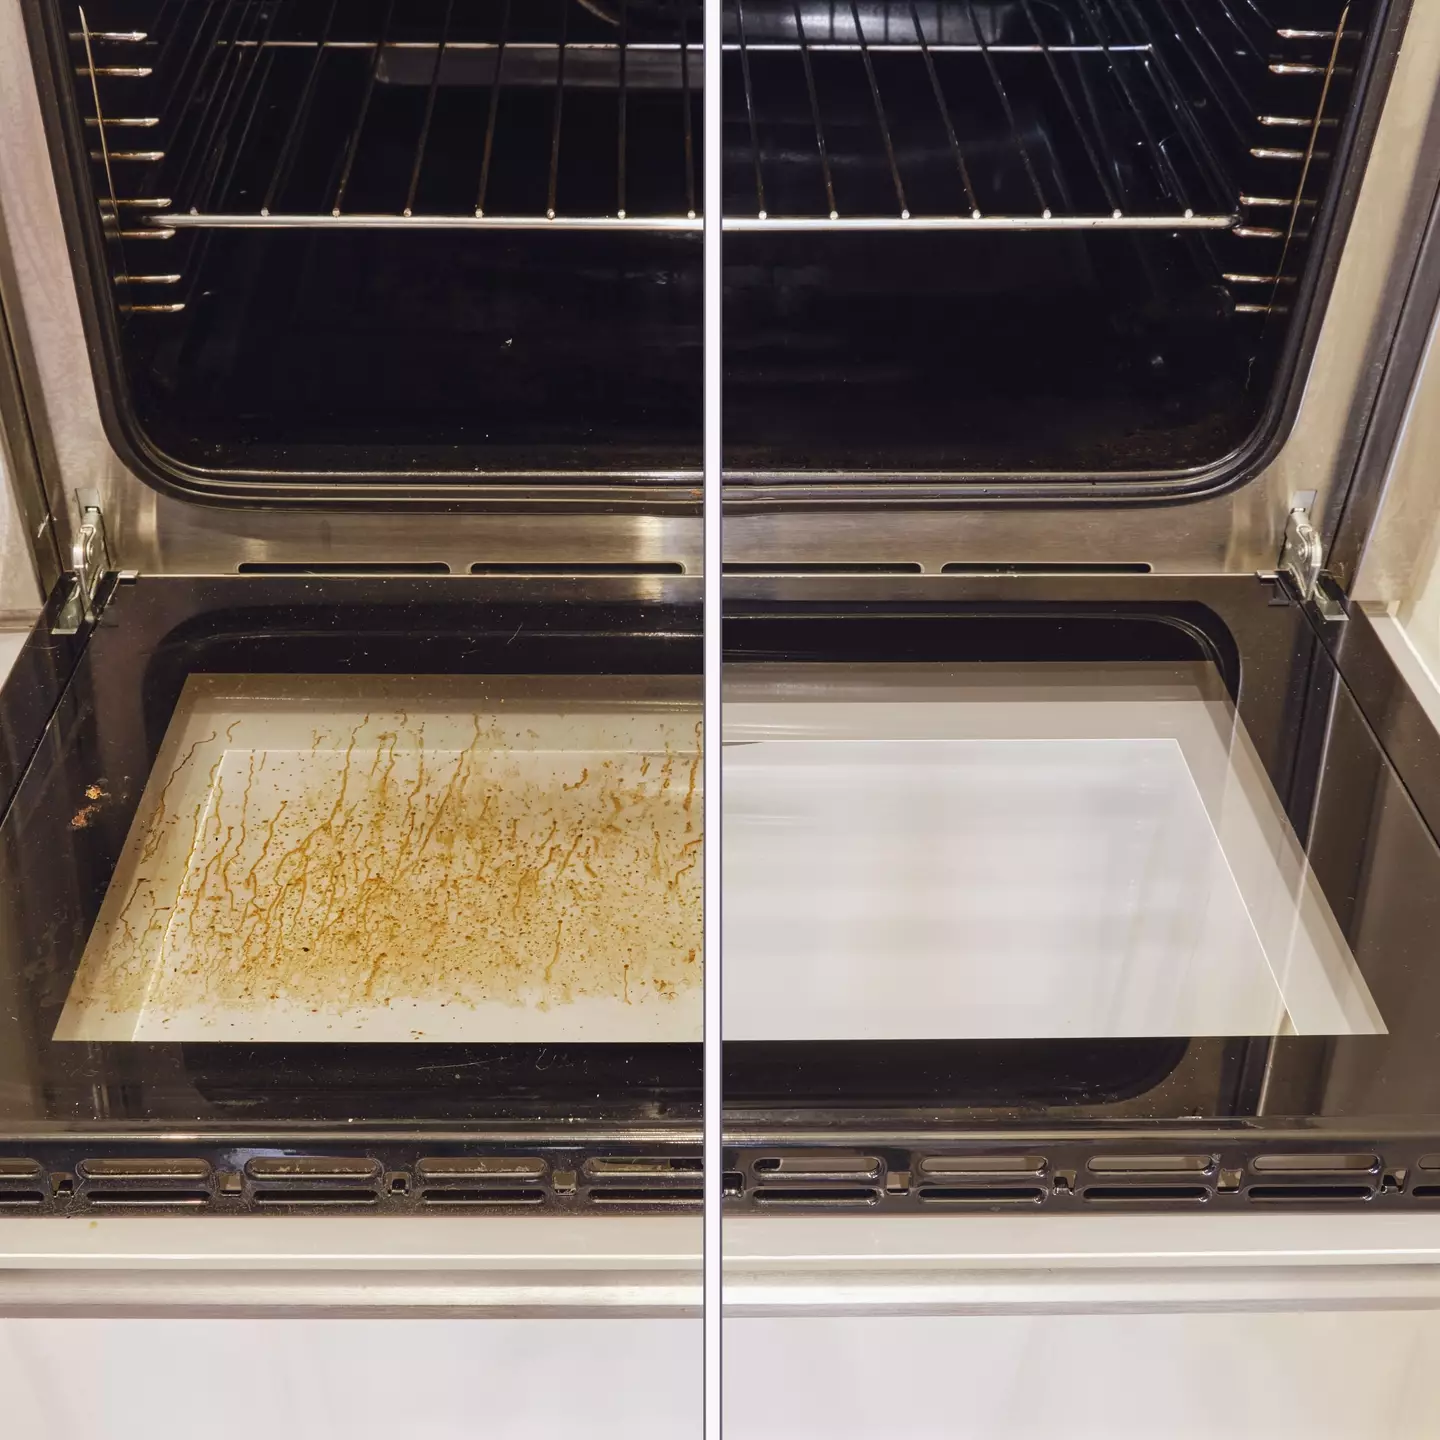 Cleaning the oven has to be one of the hardest household tasks.